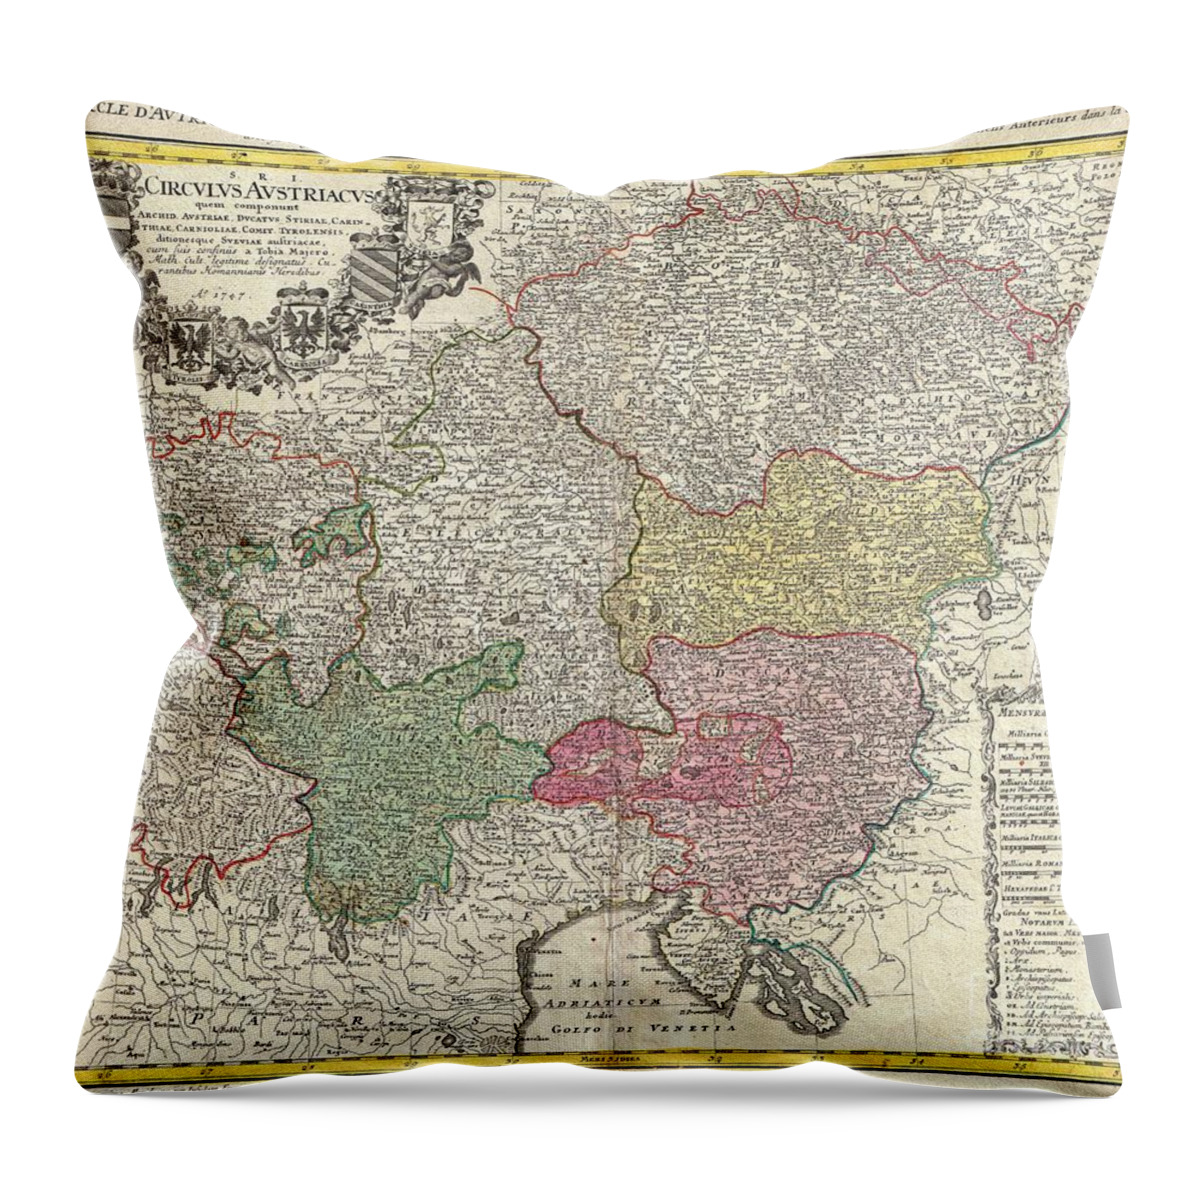 A Beautifully Detailed 1747 Homann Heirs Map Of Austria And Bohemia ( Czech Republic). Includes Parts Of Italy Throw Pillow featuring the photograph 1747 Homann Heirs Map of Austria and Bohemia by Paul Fearn